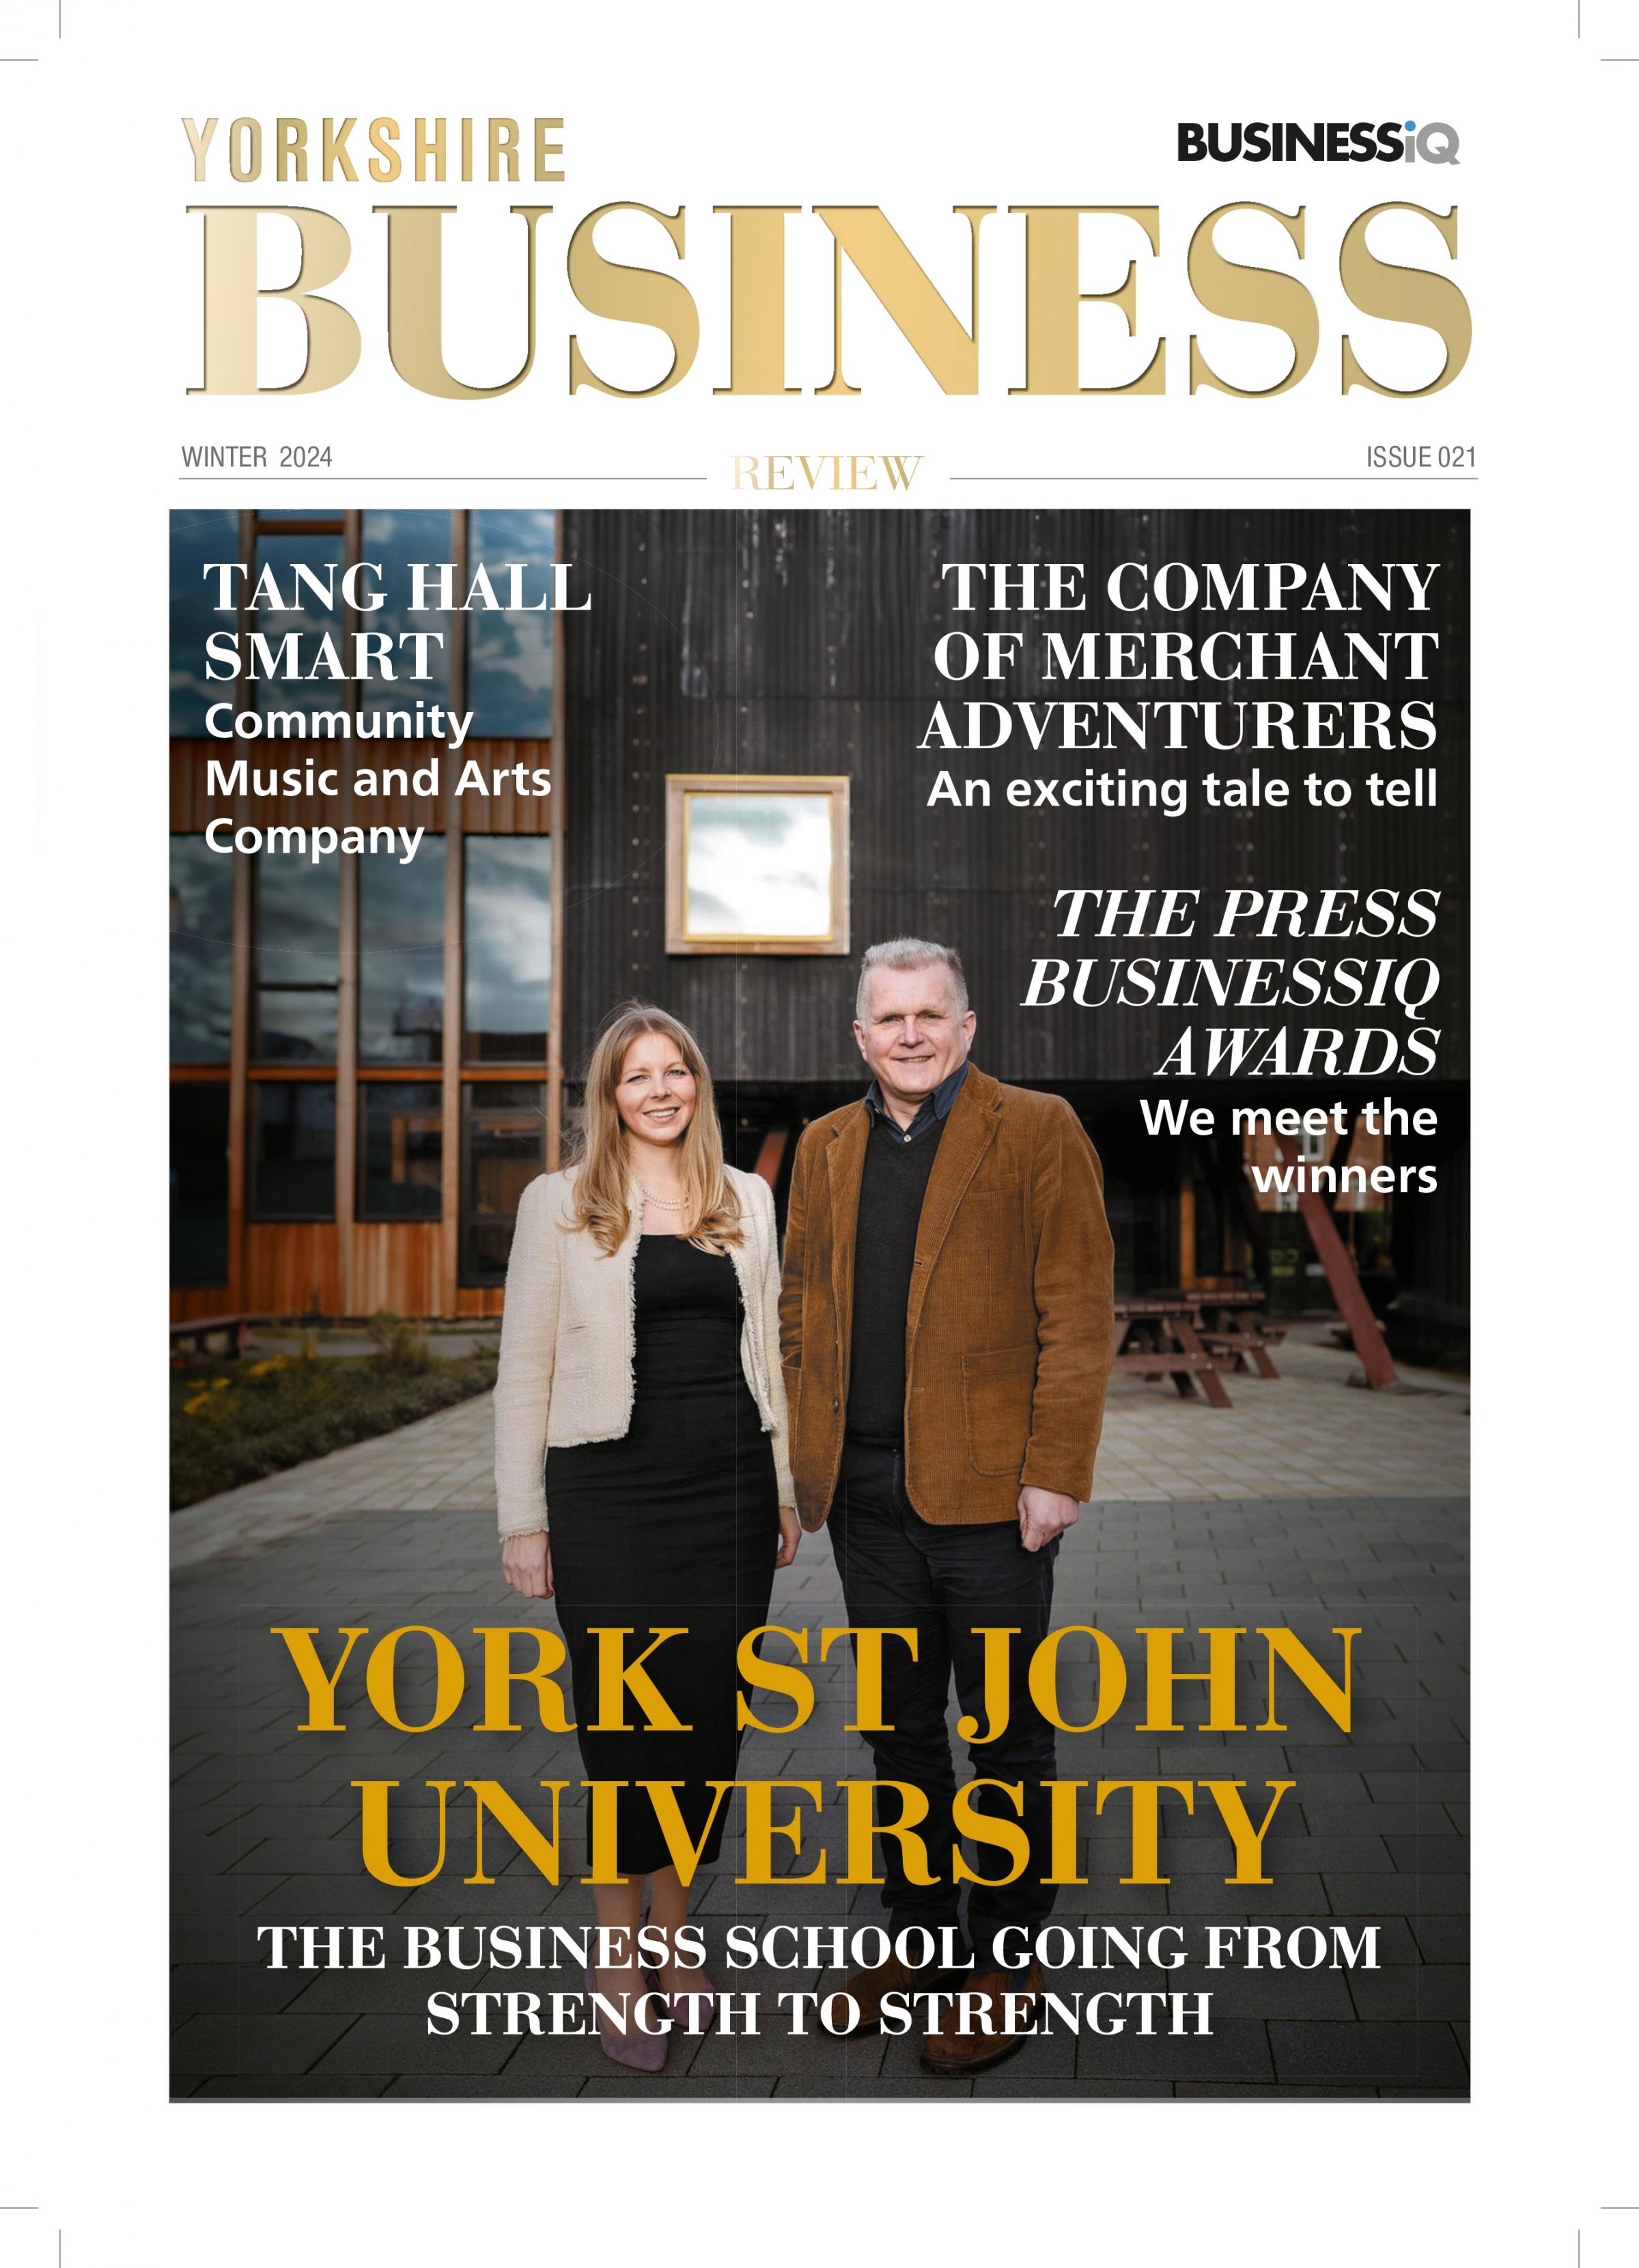 Yorkshire Business Review